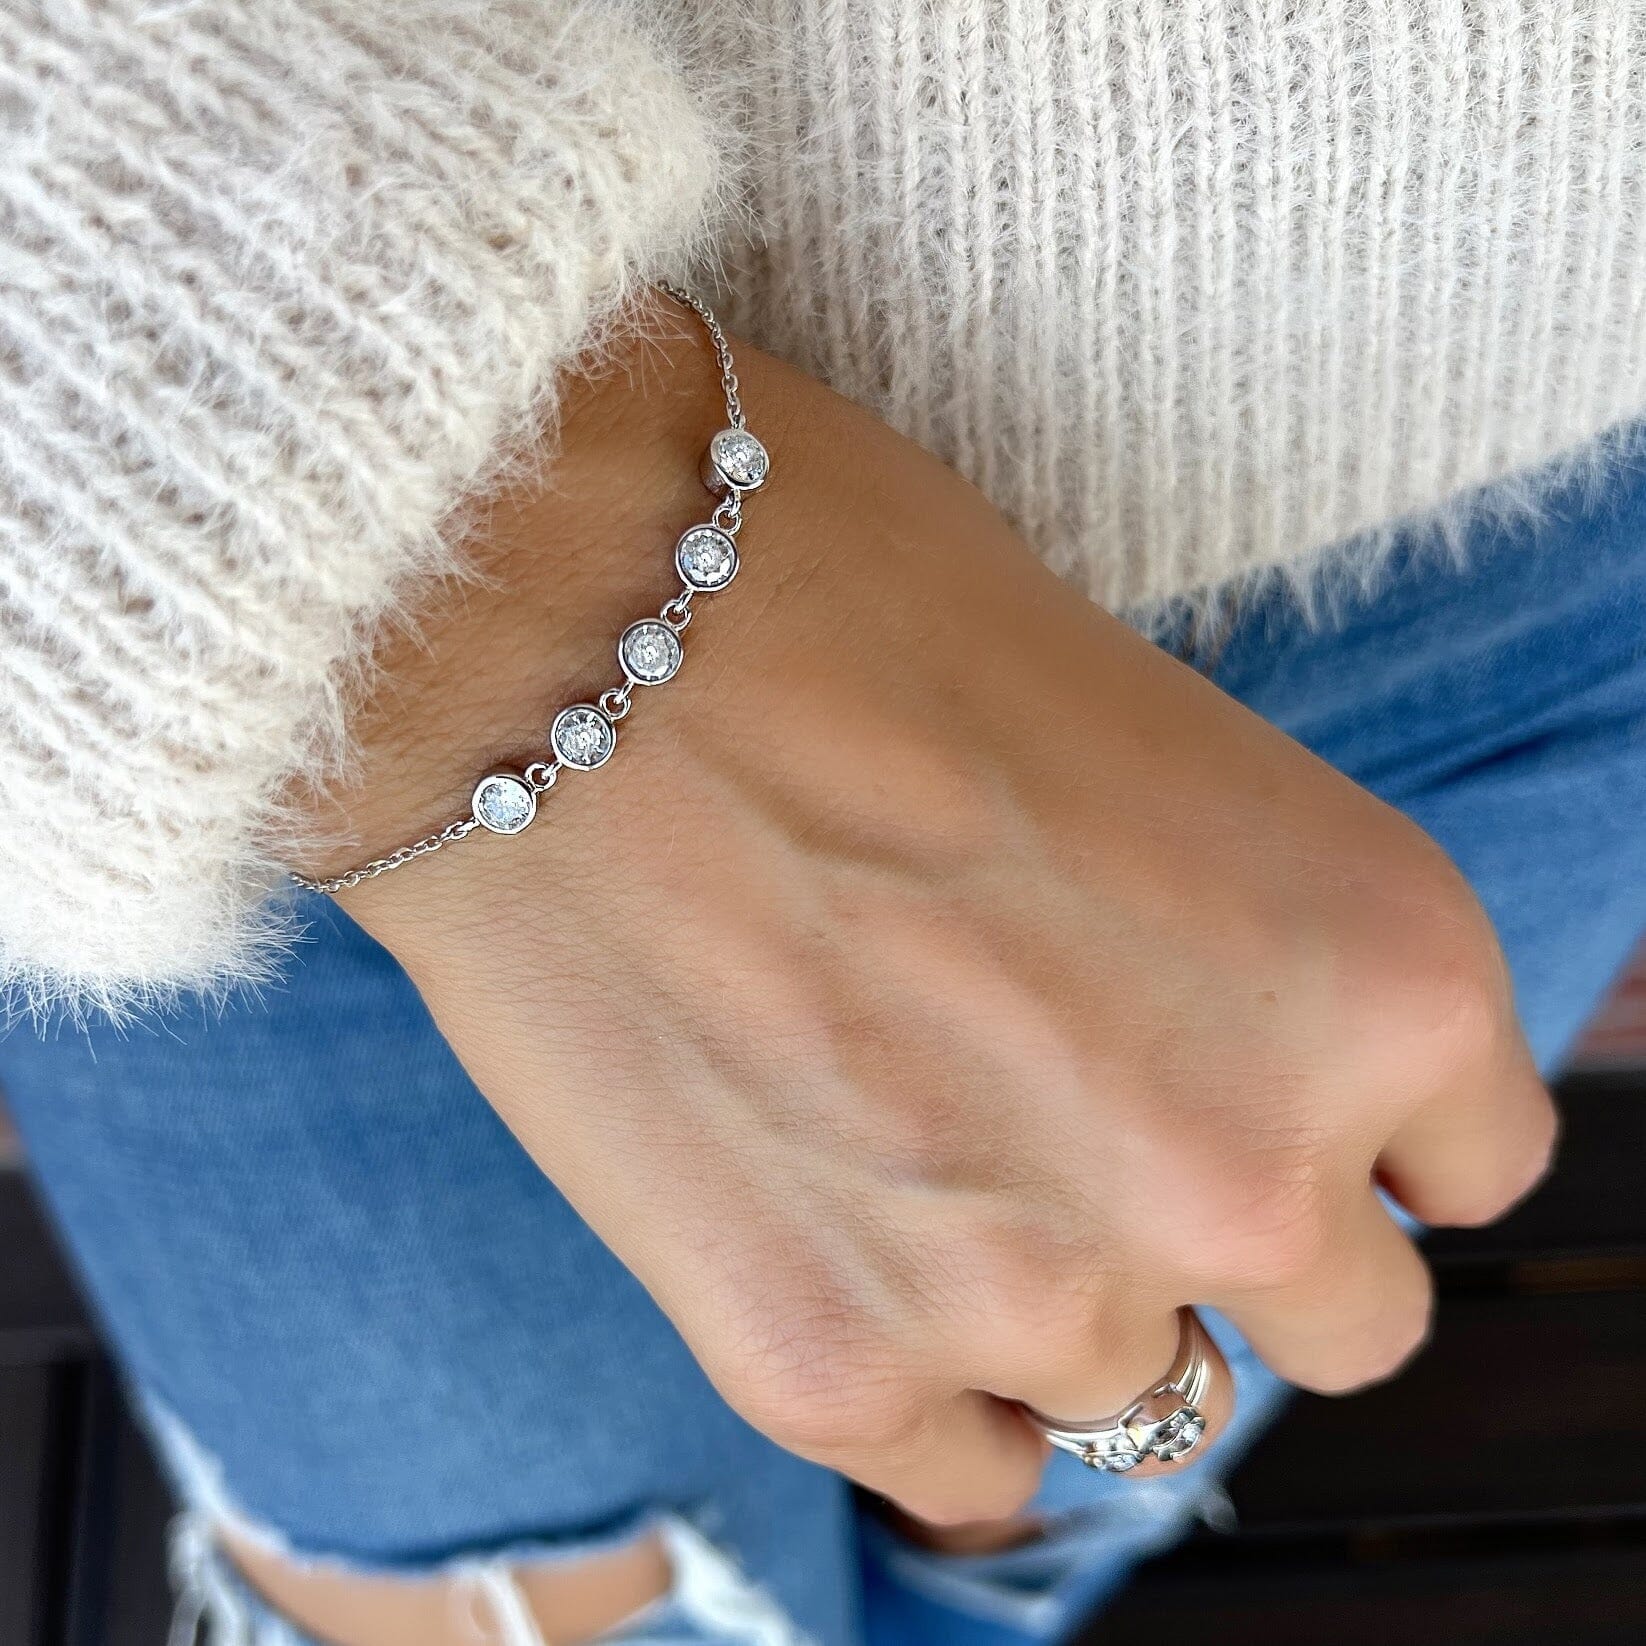 dainty sterling silver bracelet featuring 5 round cubic zirconia